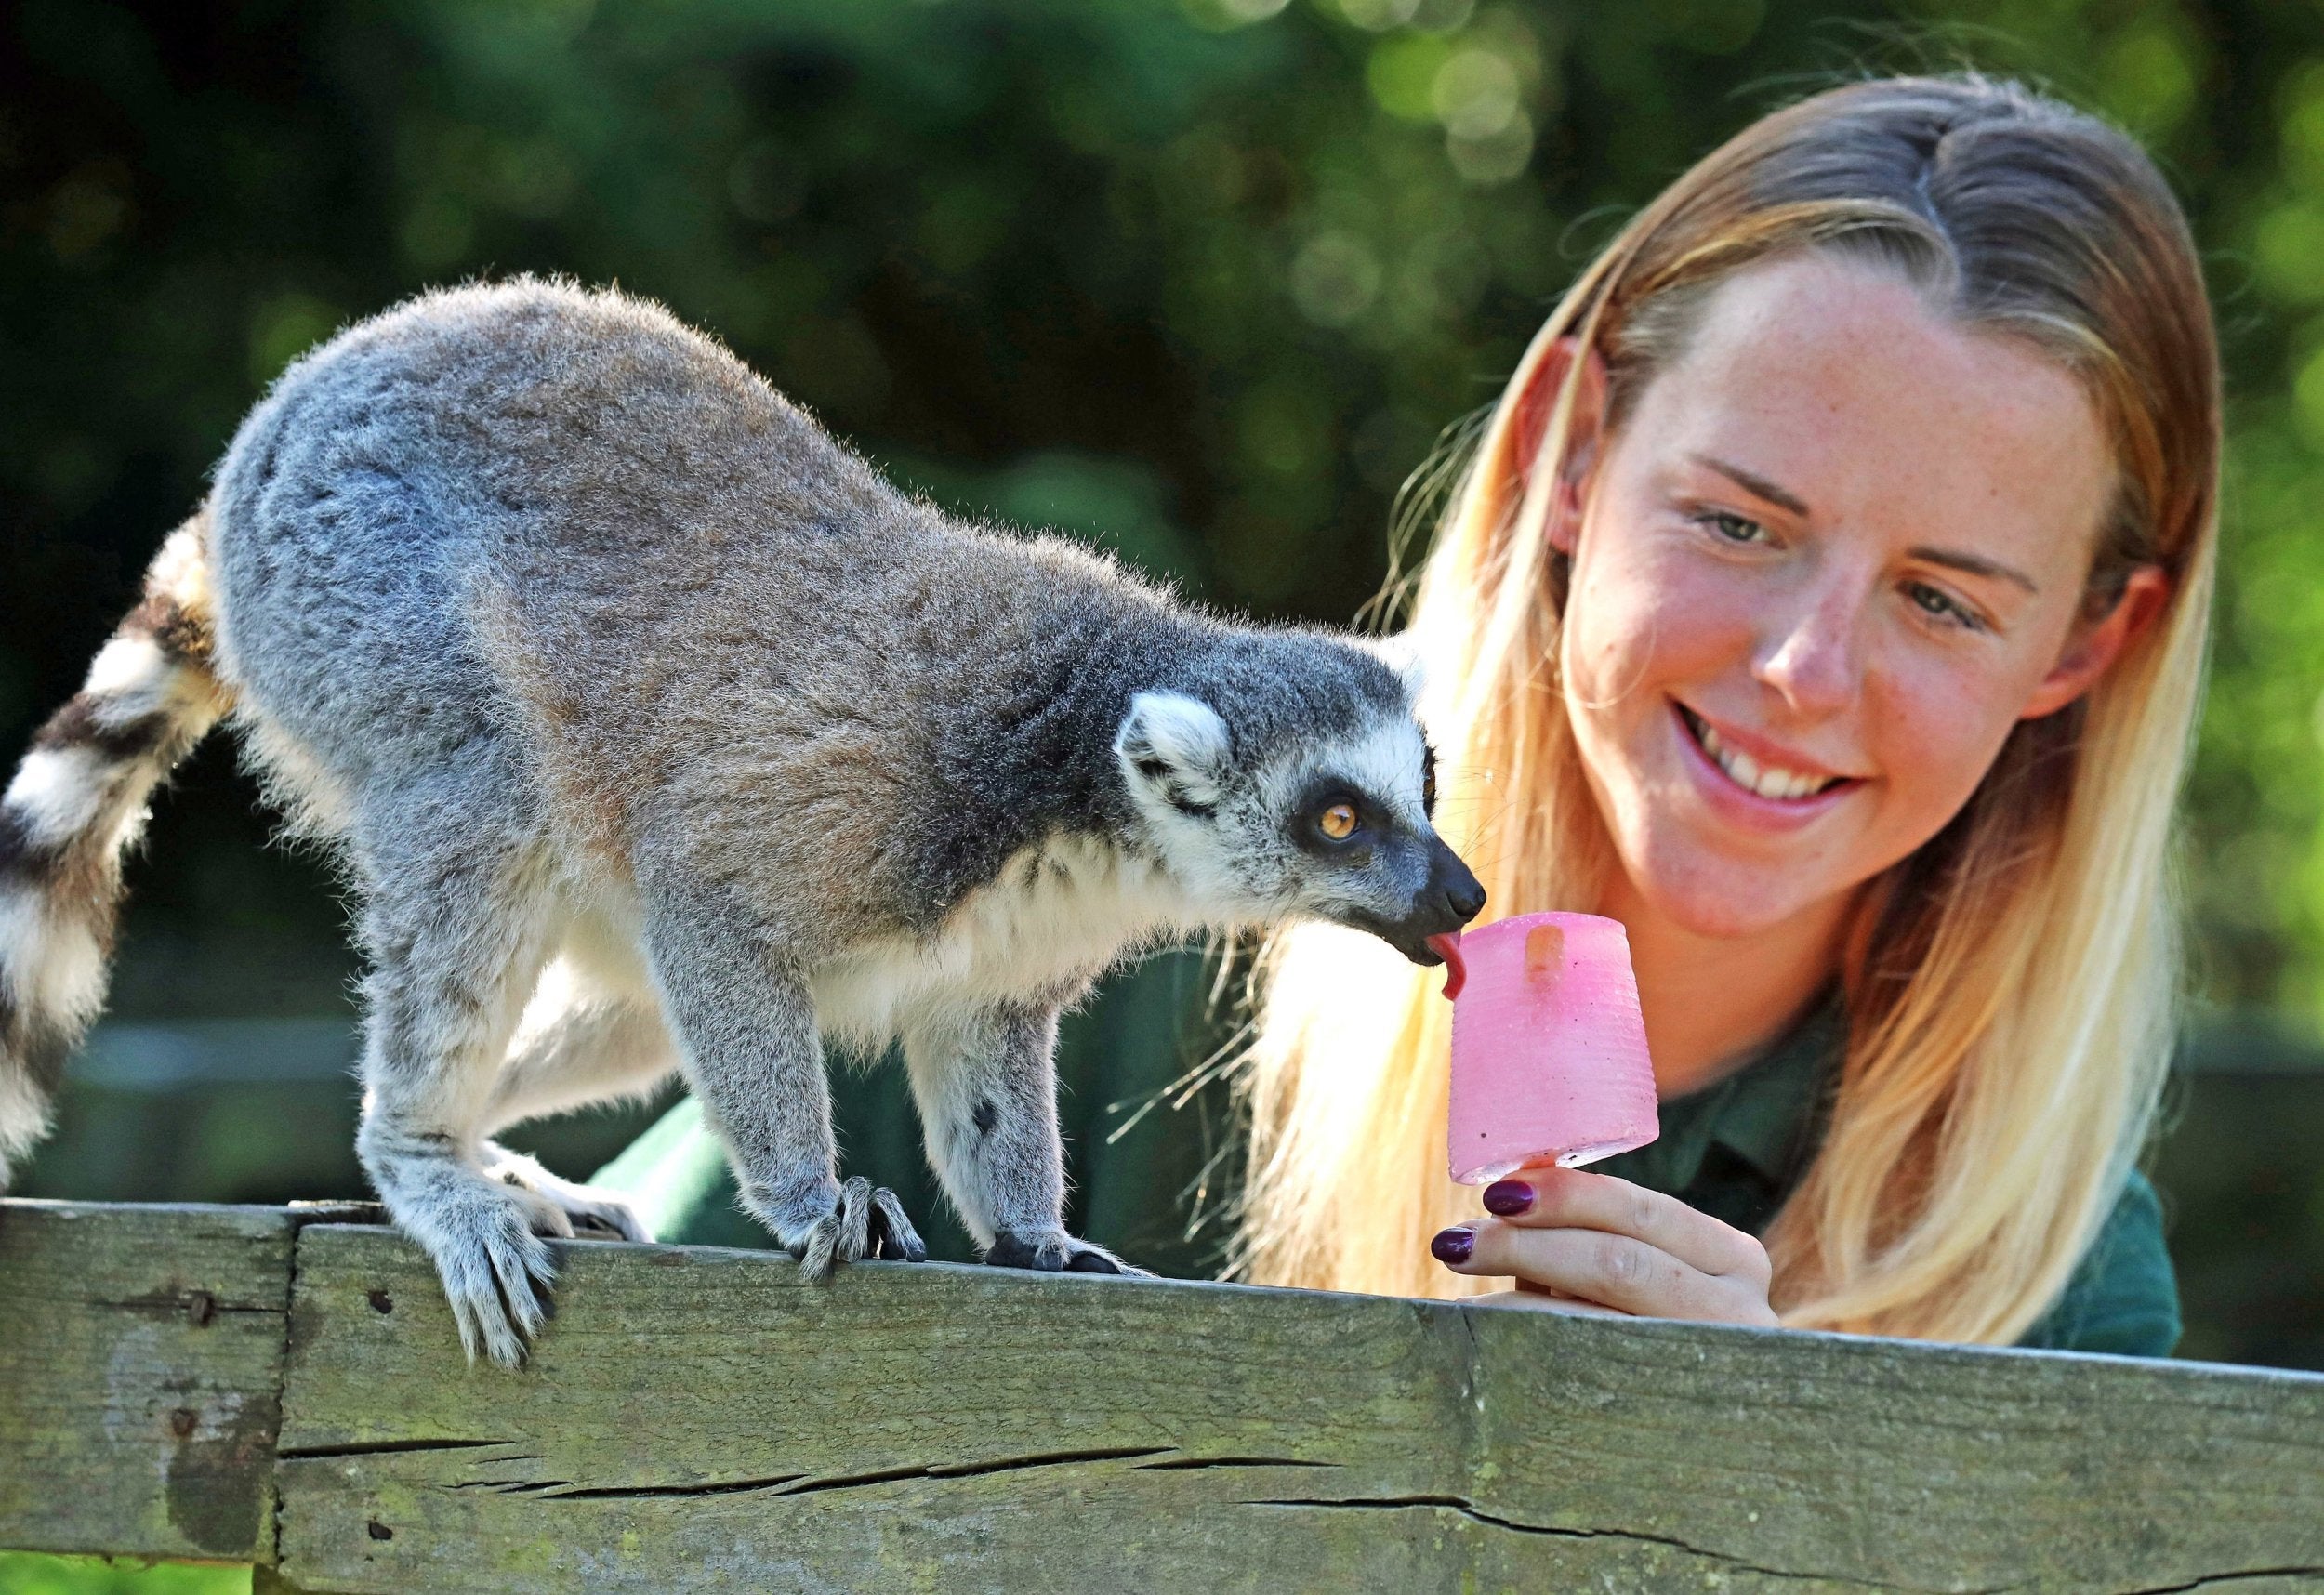 Keeper Fiona Carmichael feeds a ring-tailed lemur at Blair Drummond Safari Park near Stirling, where temperatures hit 31.9C on Wednesday